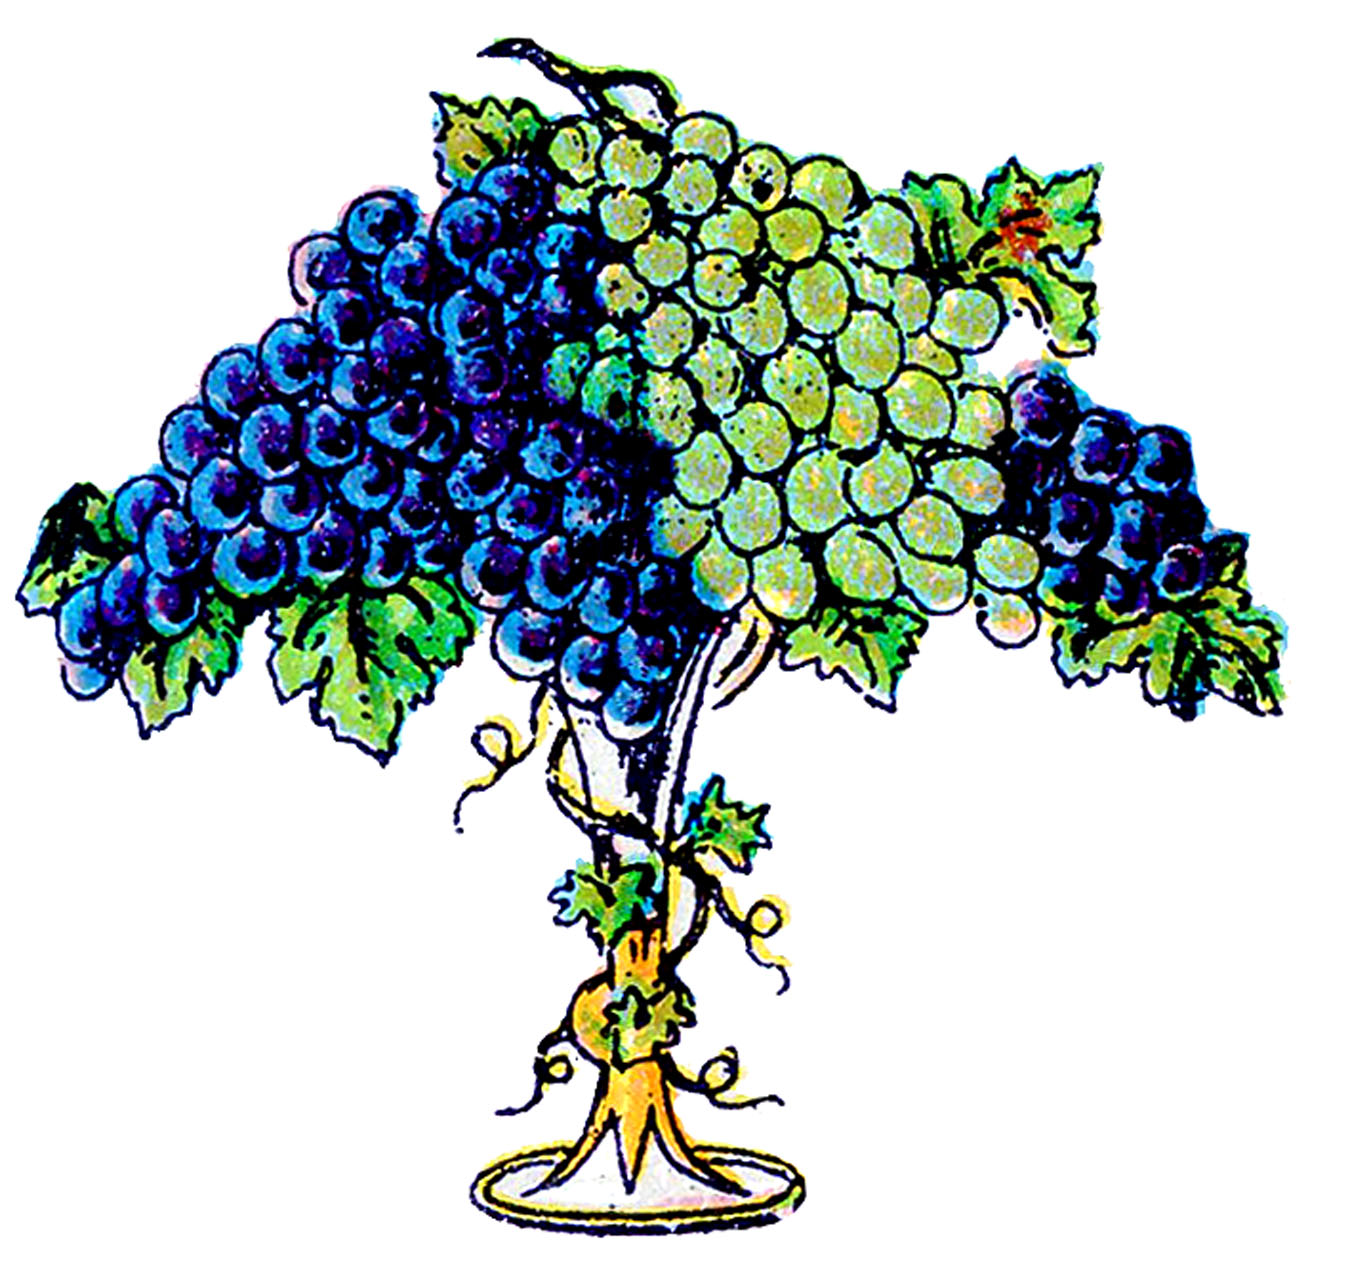 6 Grapes Clipart and Botanicals